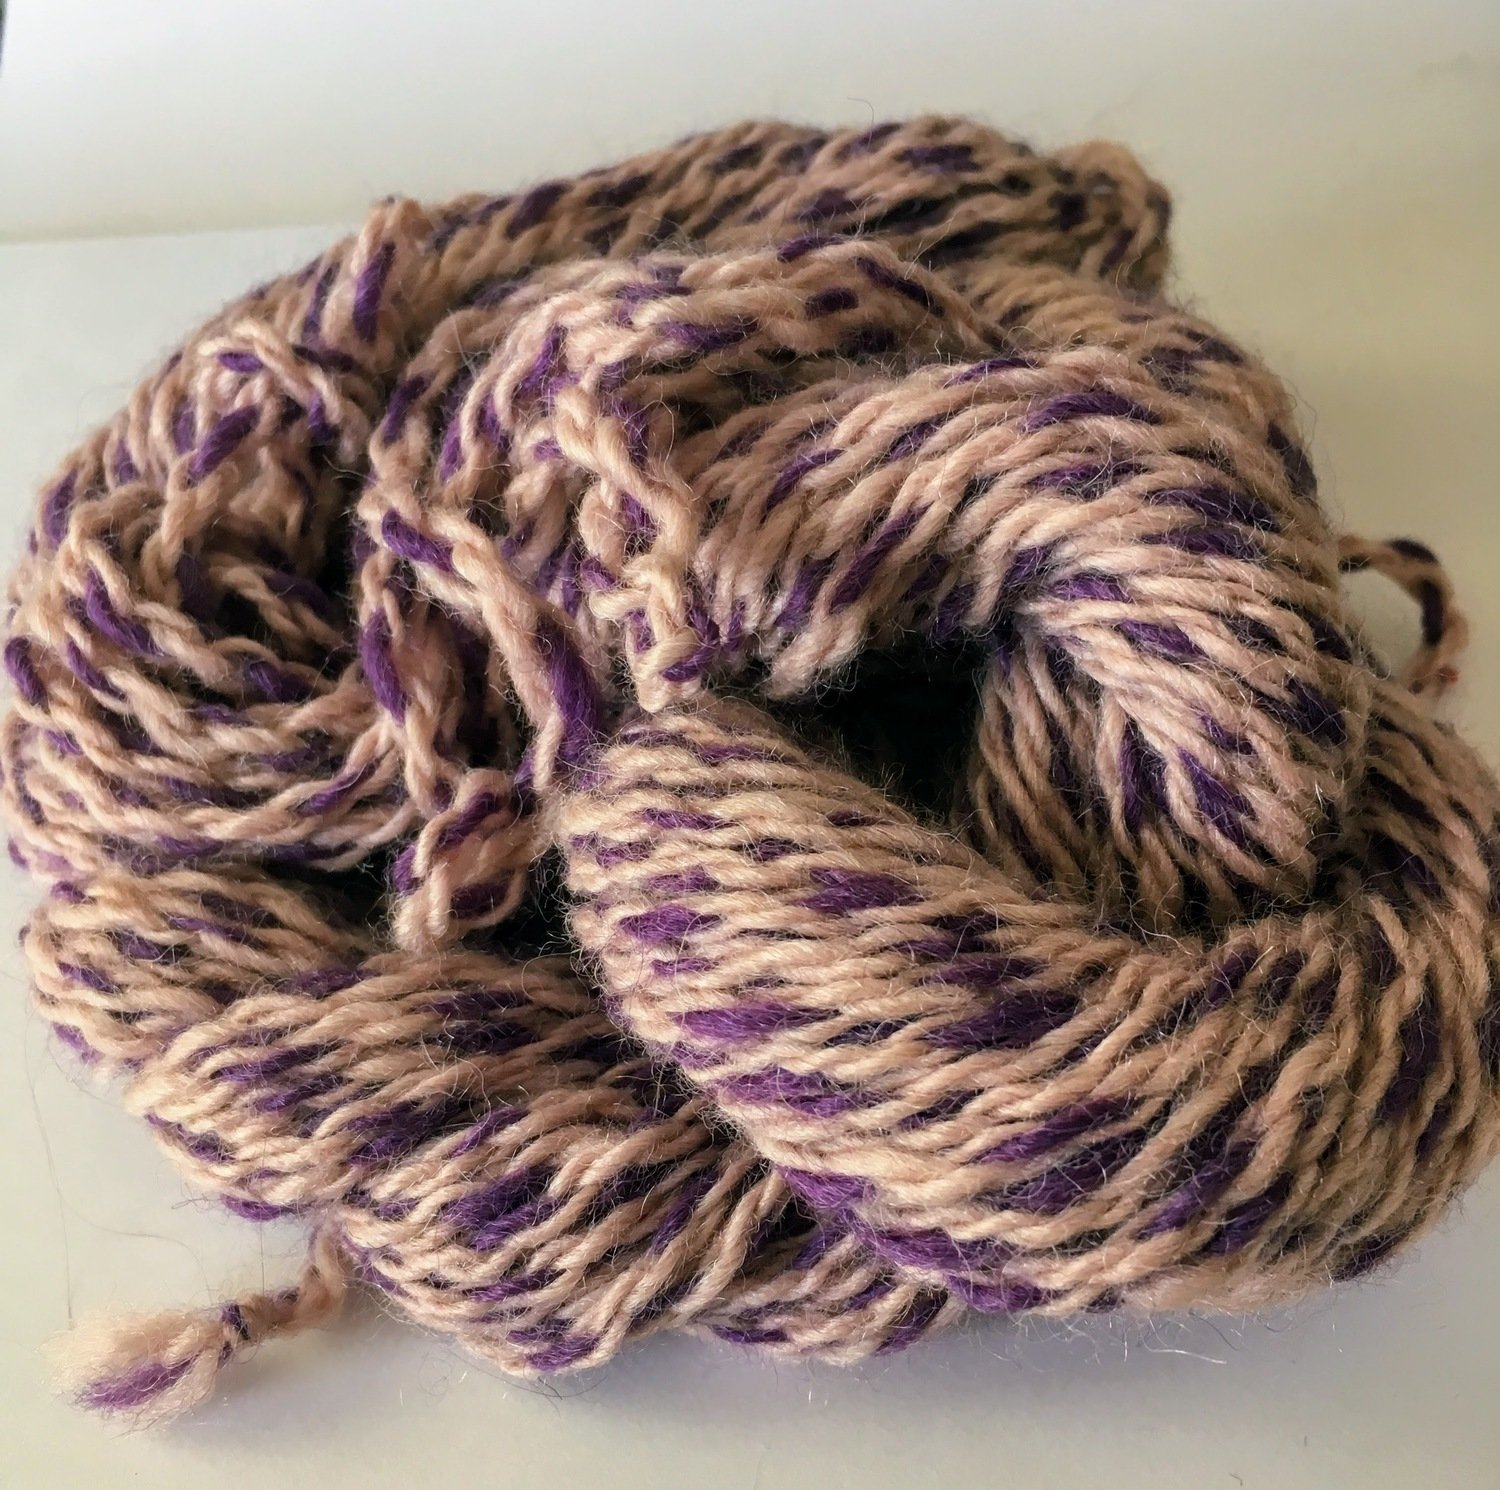 Breezy Hill Cottage-Milled, Hand-Dyed Yarn - Plum Ice